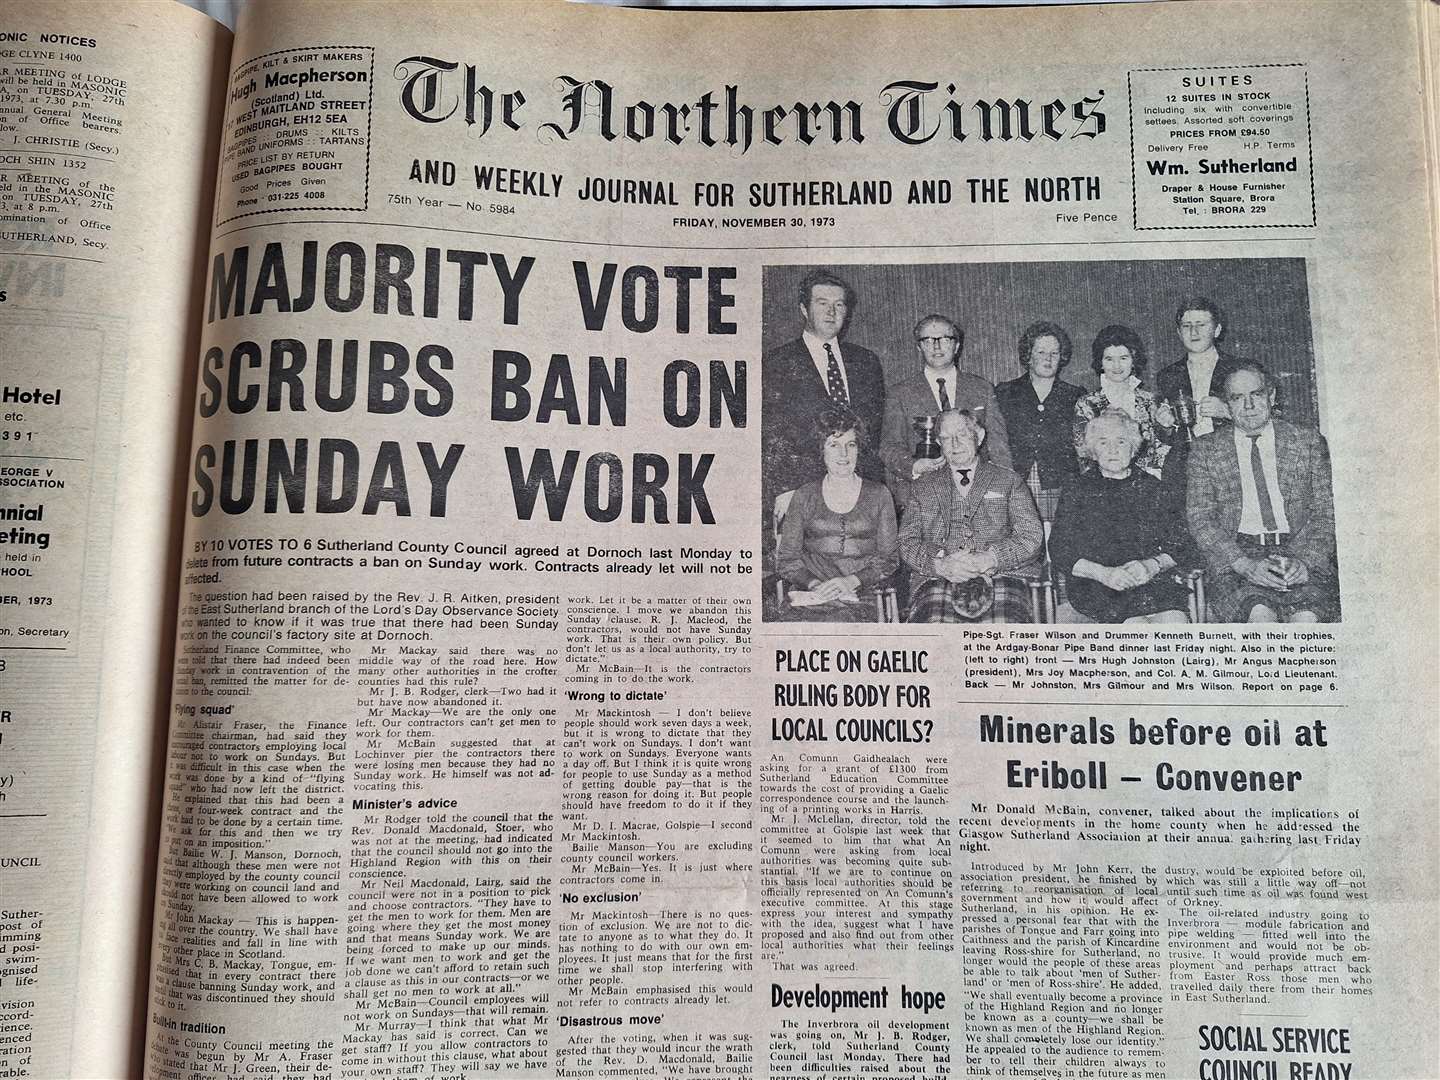 The edition of November 30, 1973